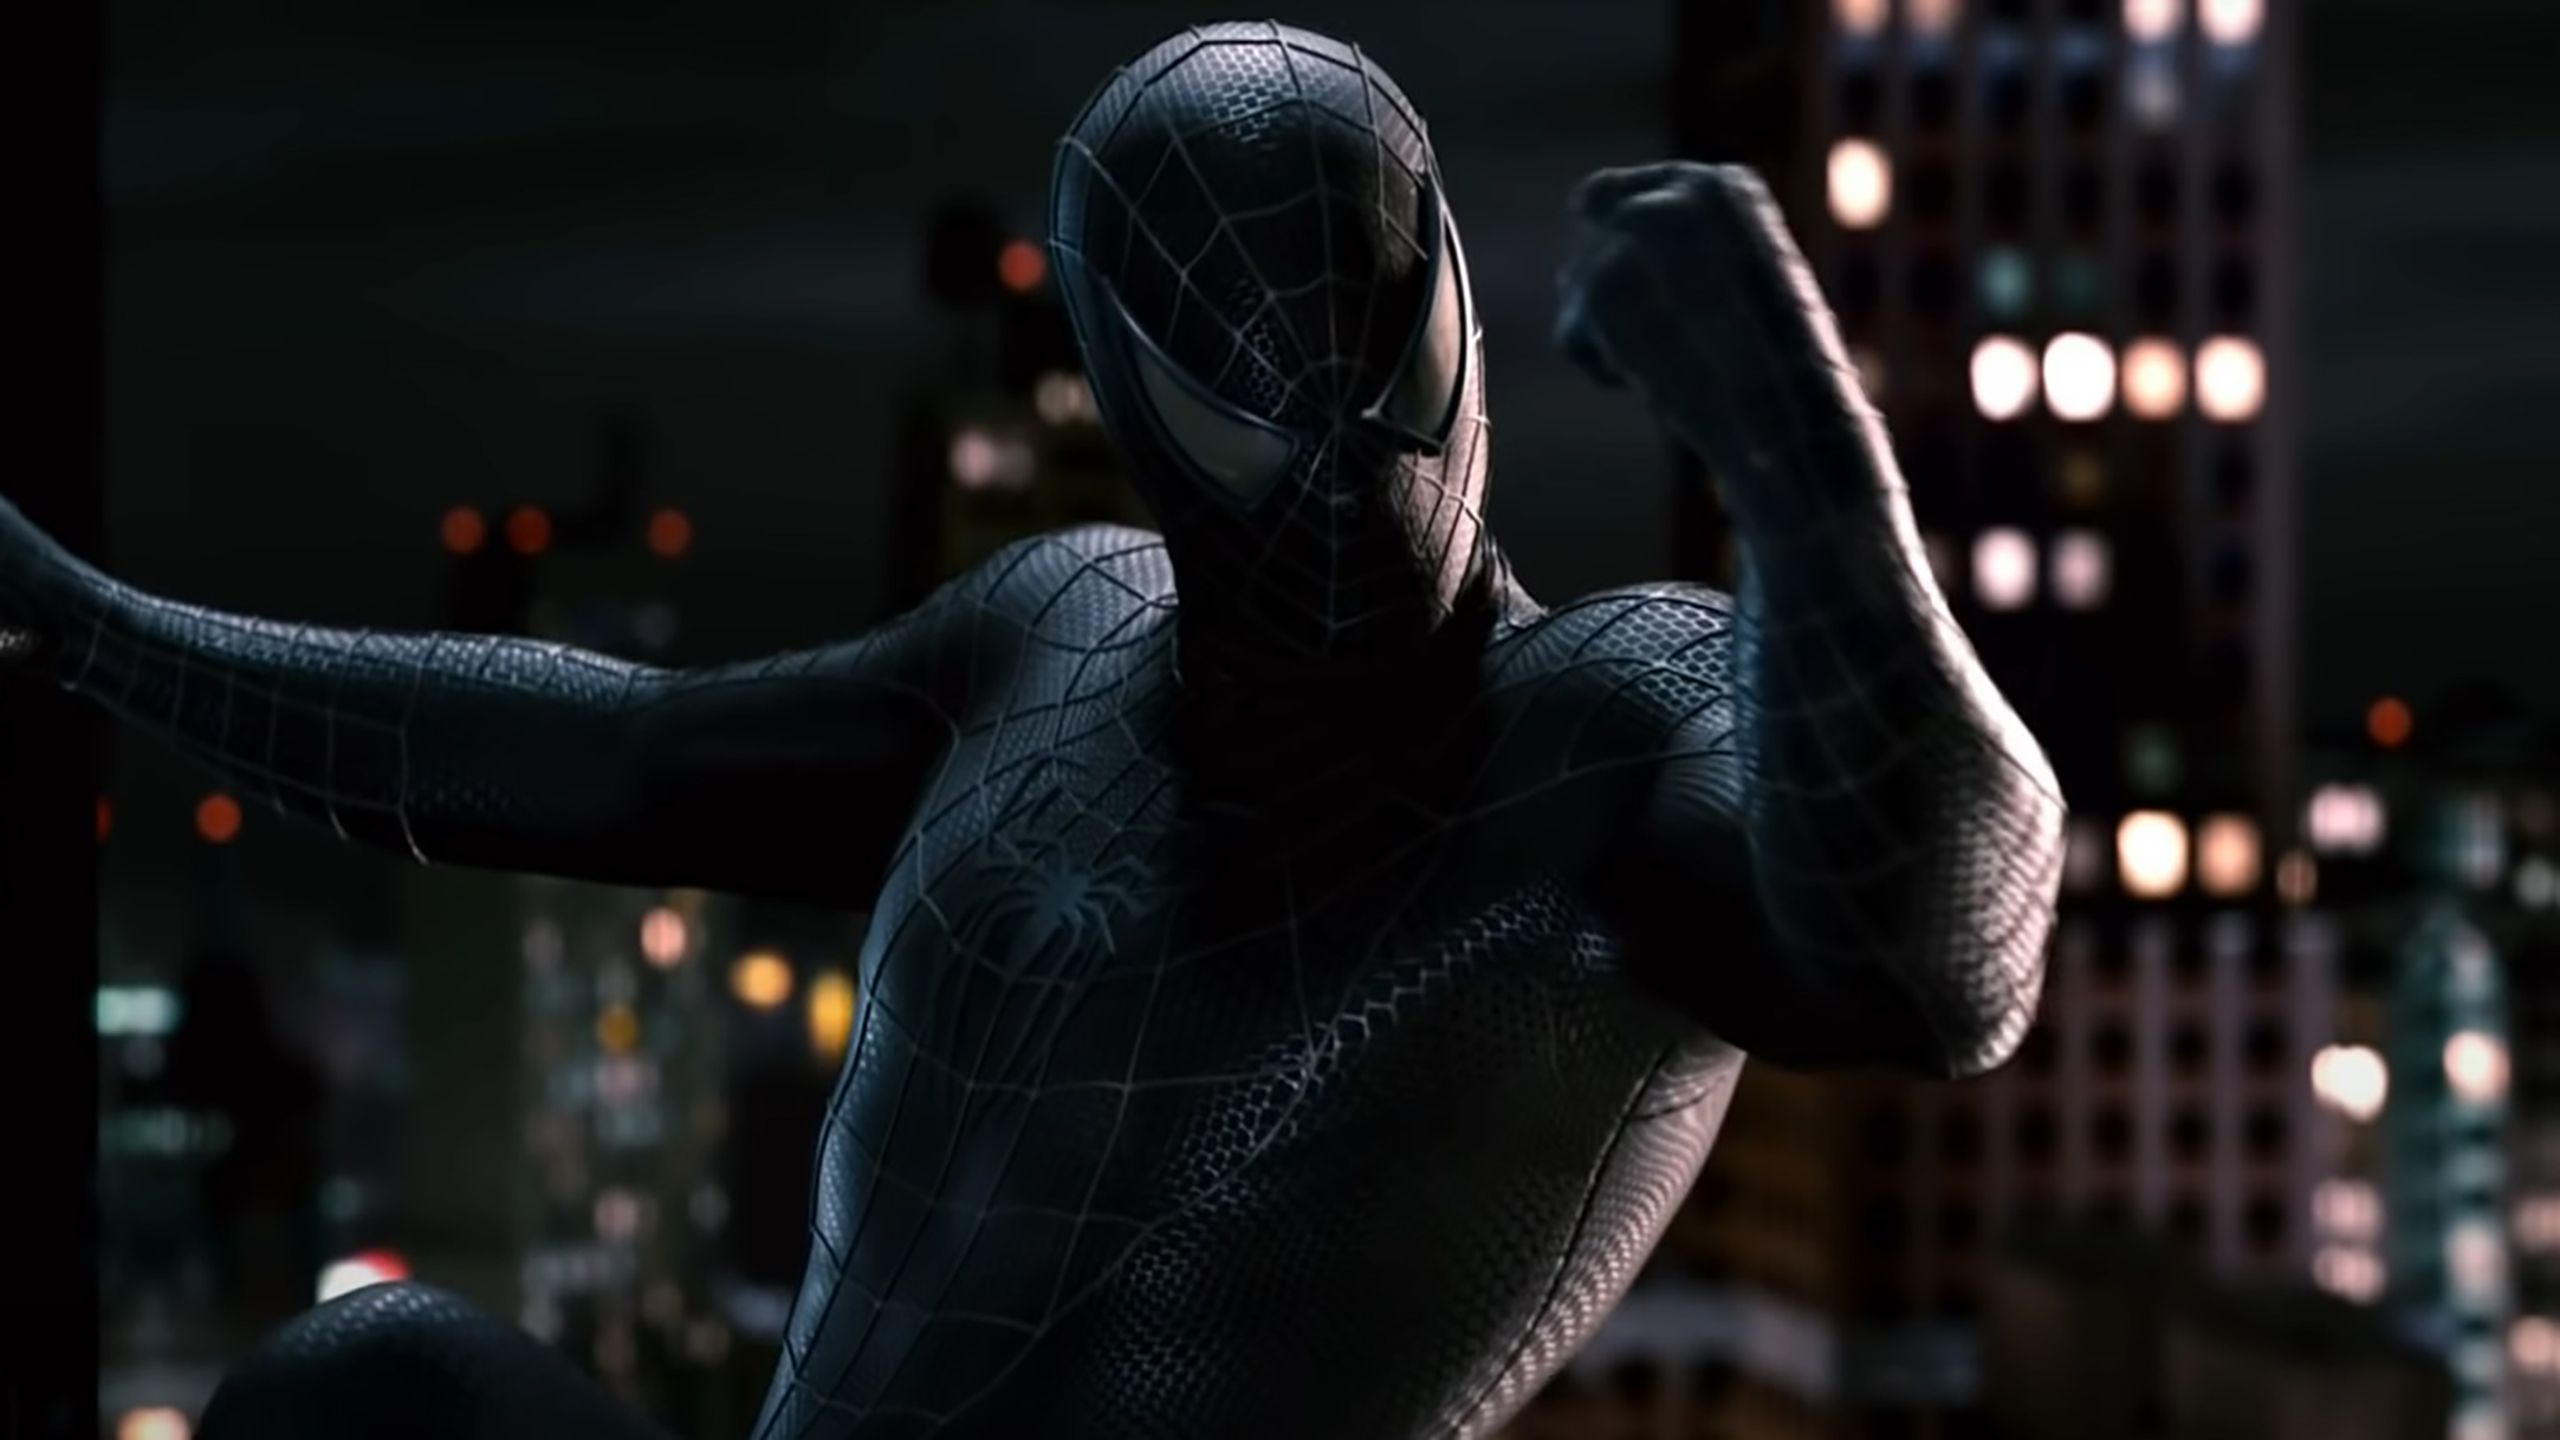 How to watch the Spider-Man movies in order (including Venom and Morbius)